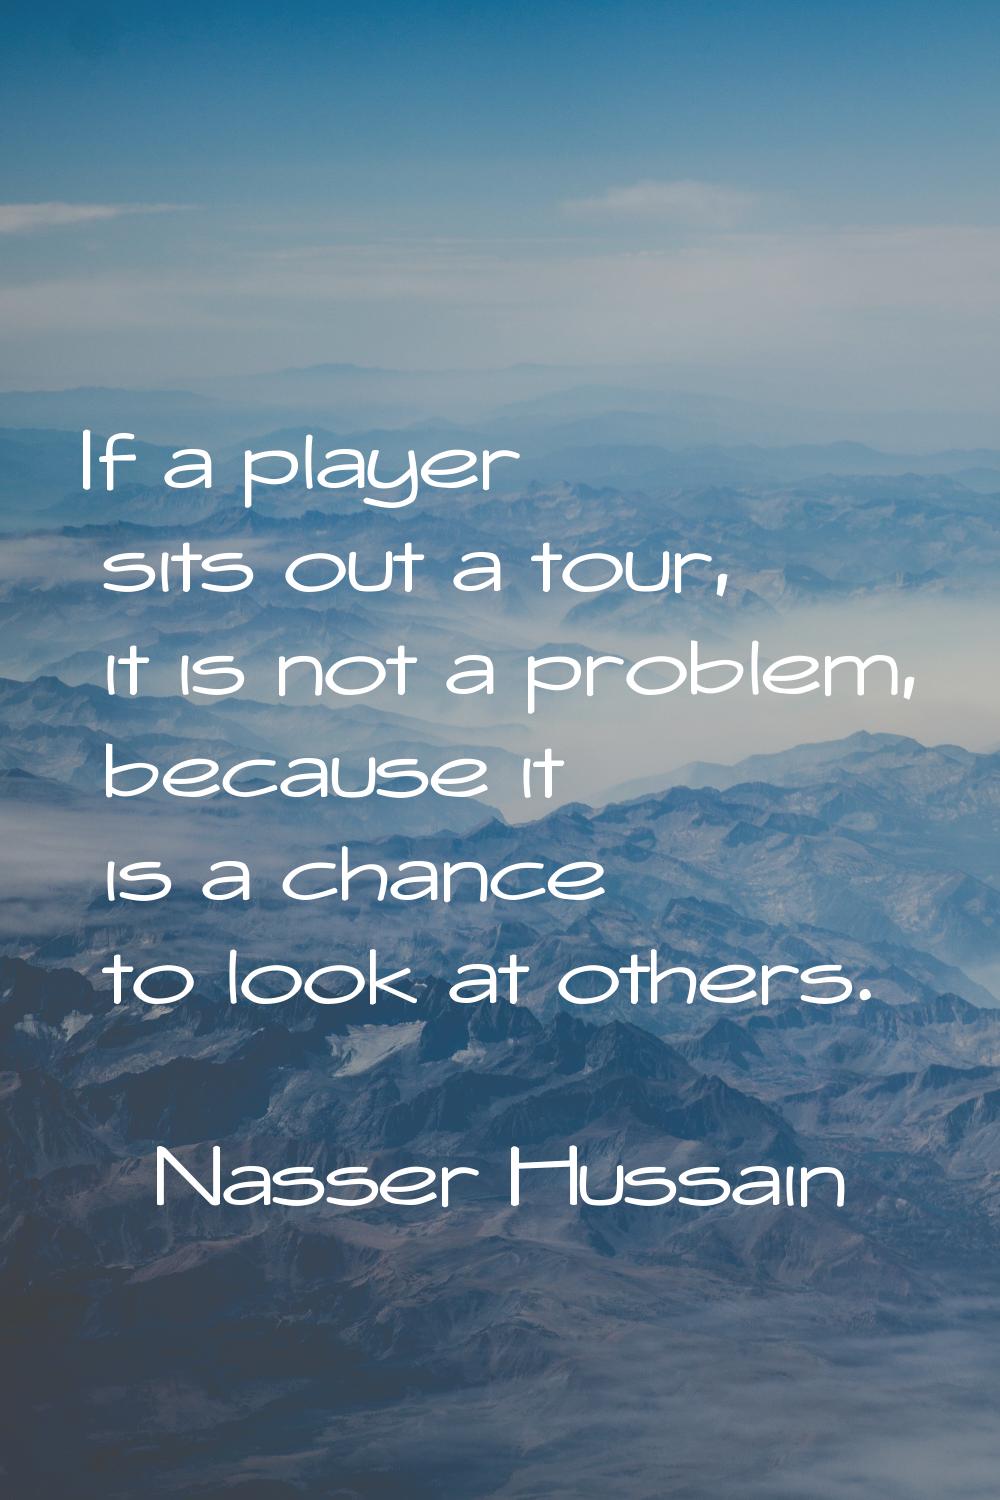 If a player sits out a tour, it is not a problem, because it is a chance to look at others.